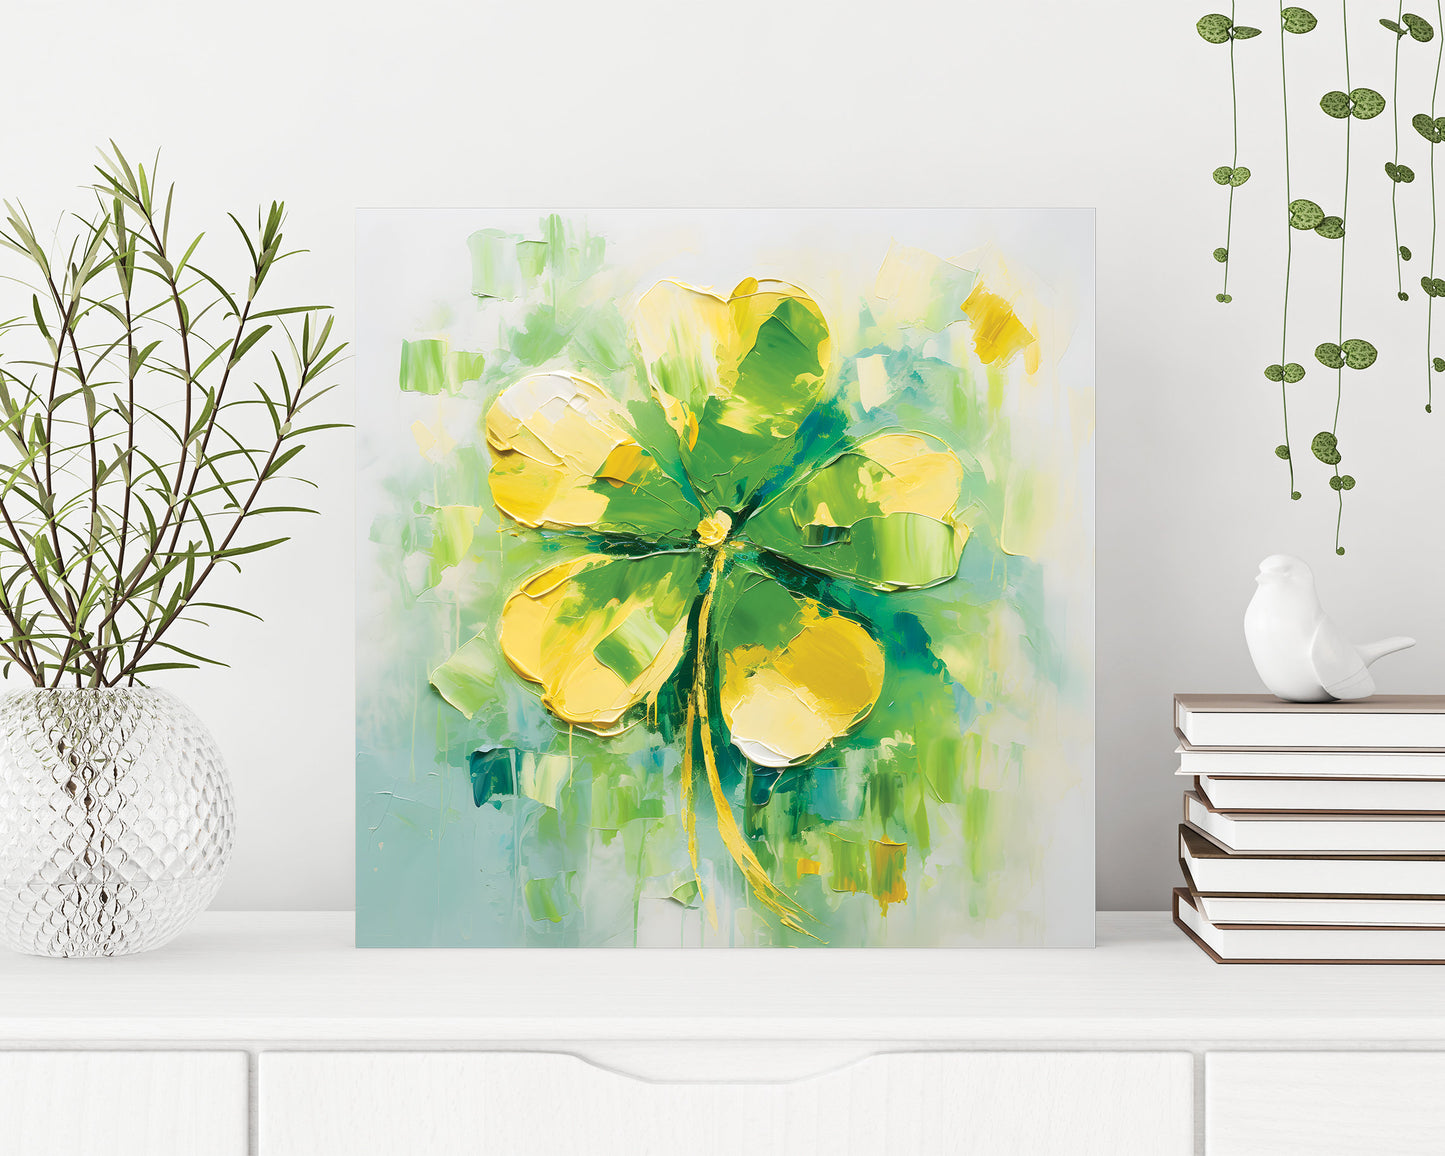 12in Oil Painting Style of a Shamrock Farmhouse Canvas UV Print Wall Art, St. Patrick's Day Wall Decor Living Room Decor